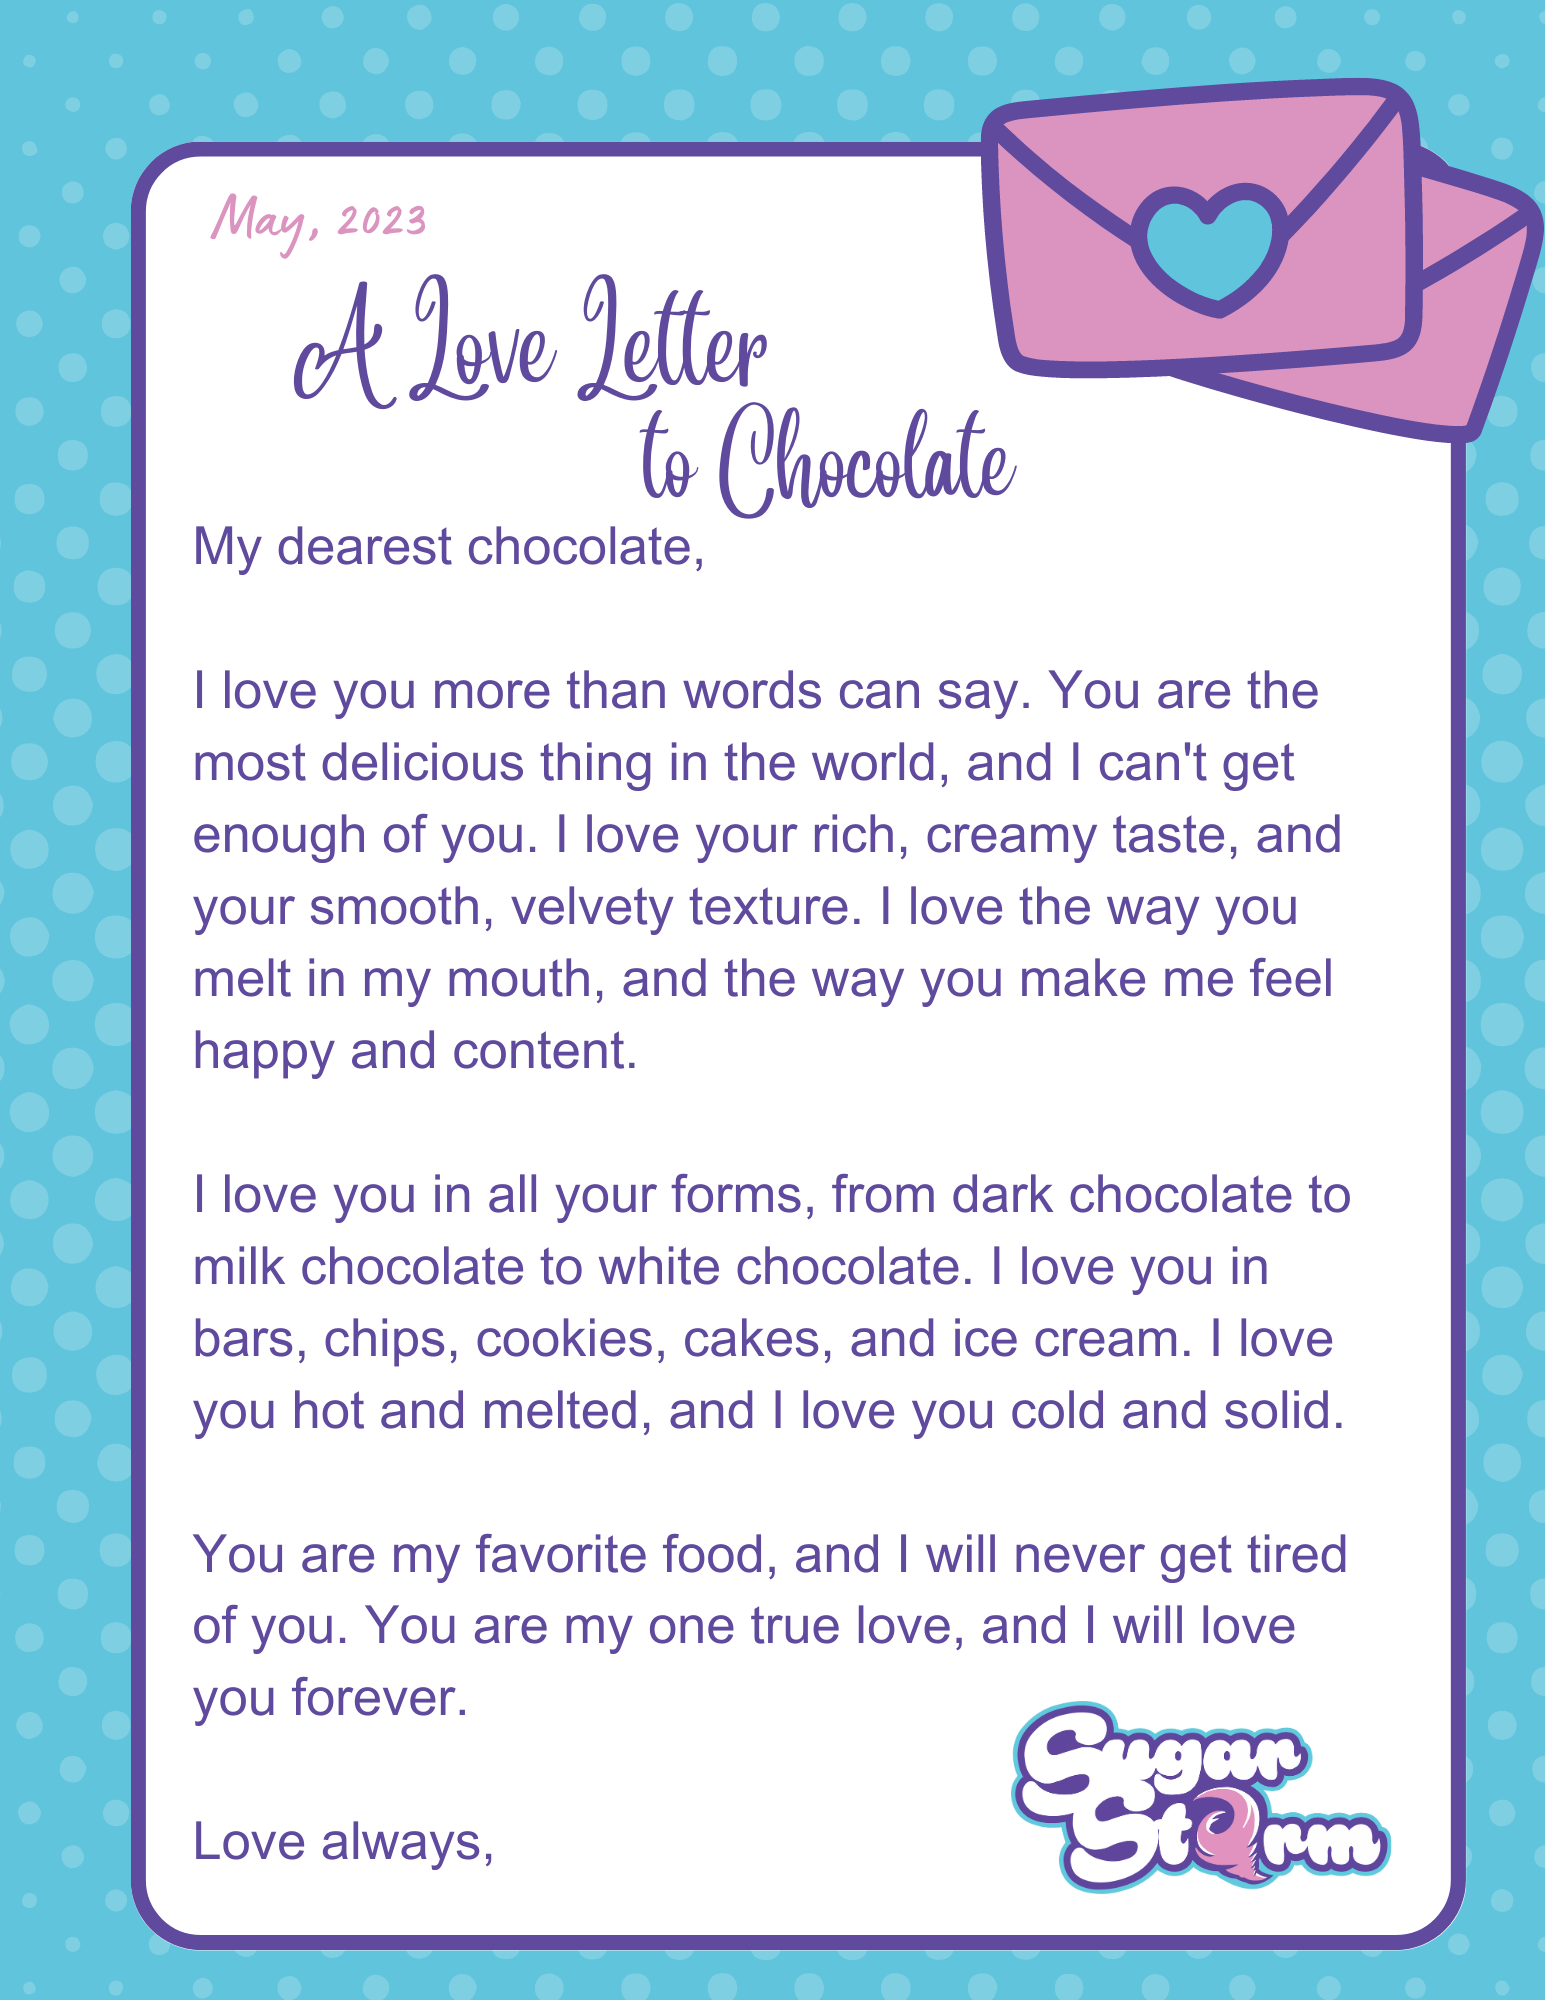 Love Letter To Chocolate from Sugar Storm